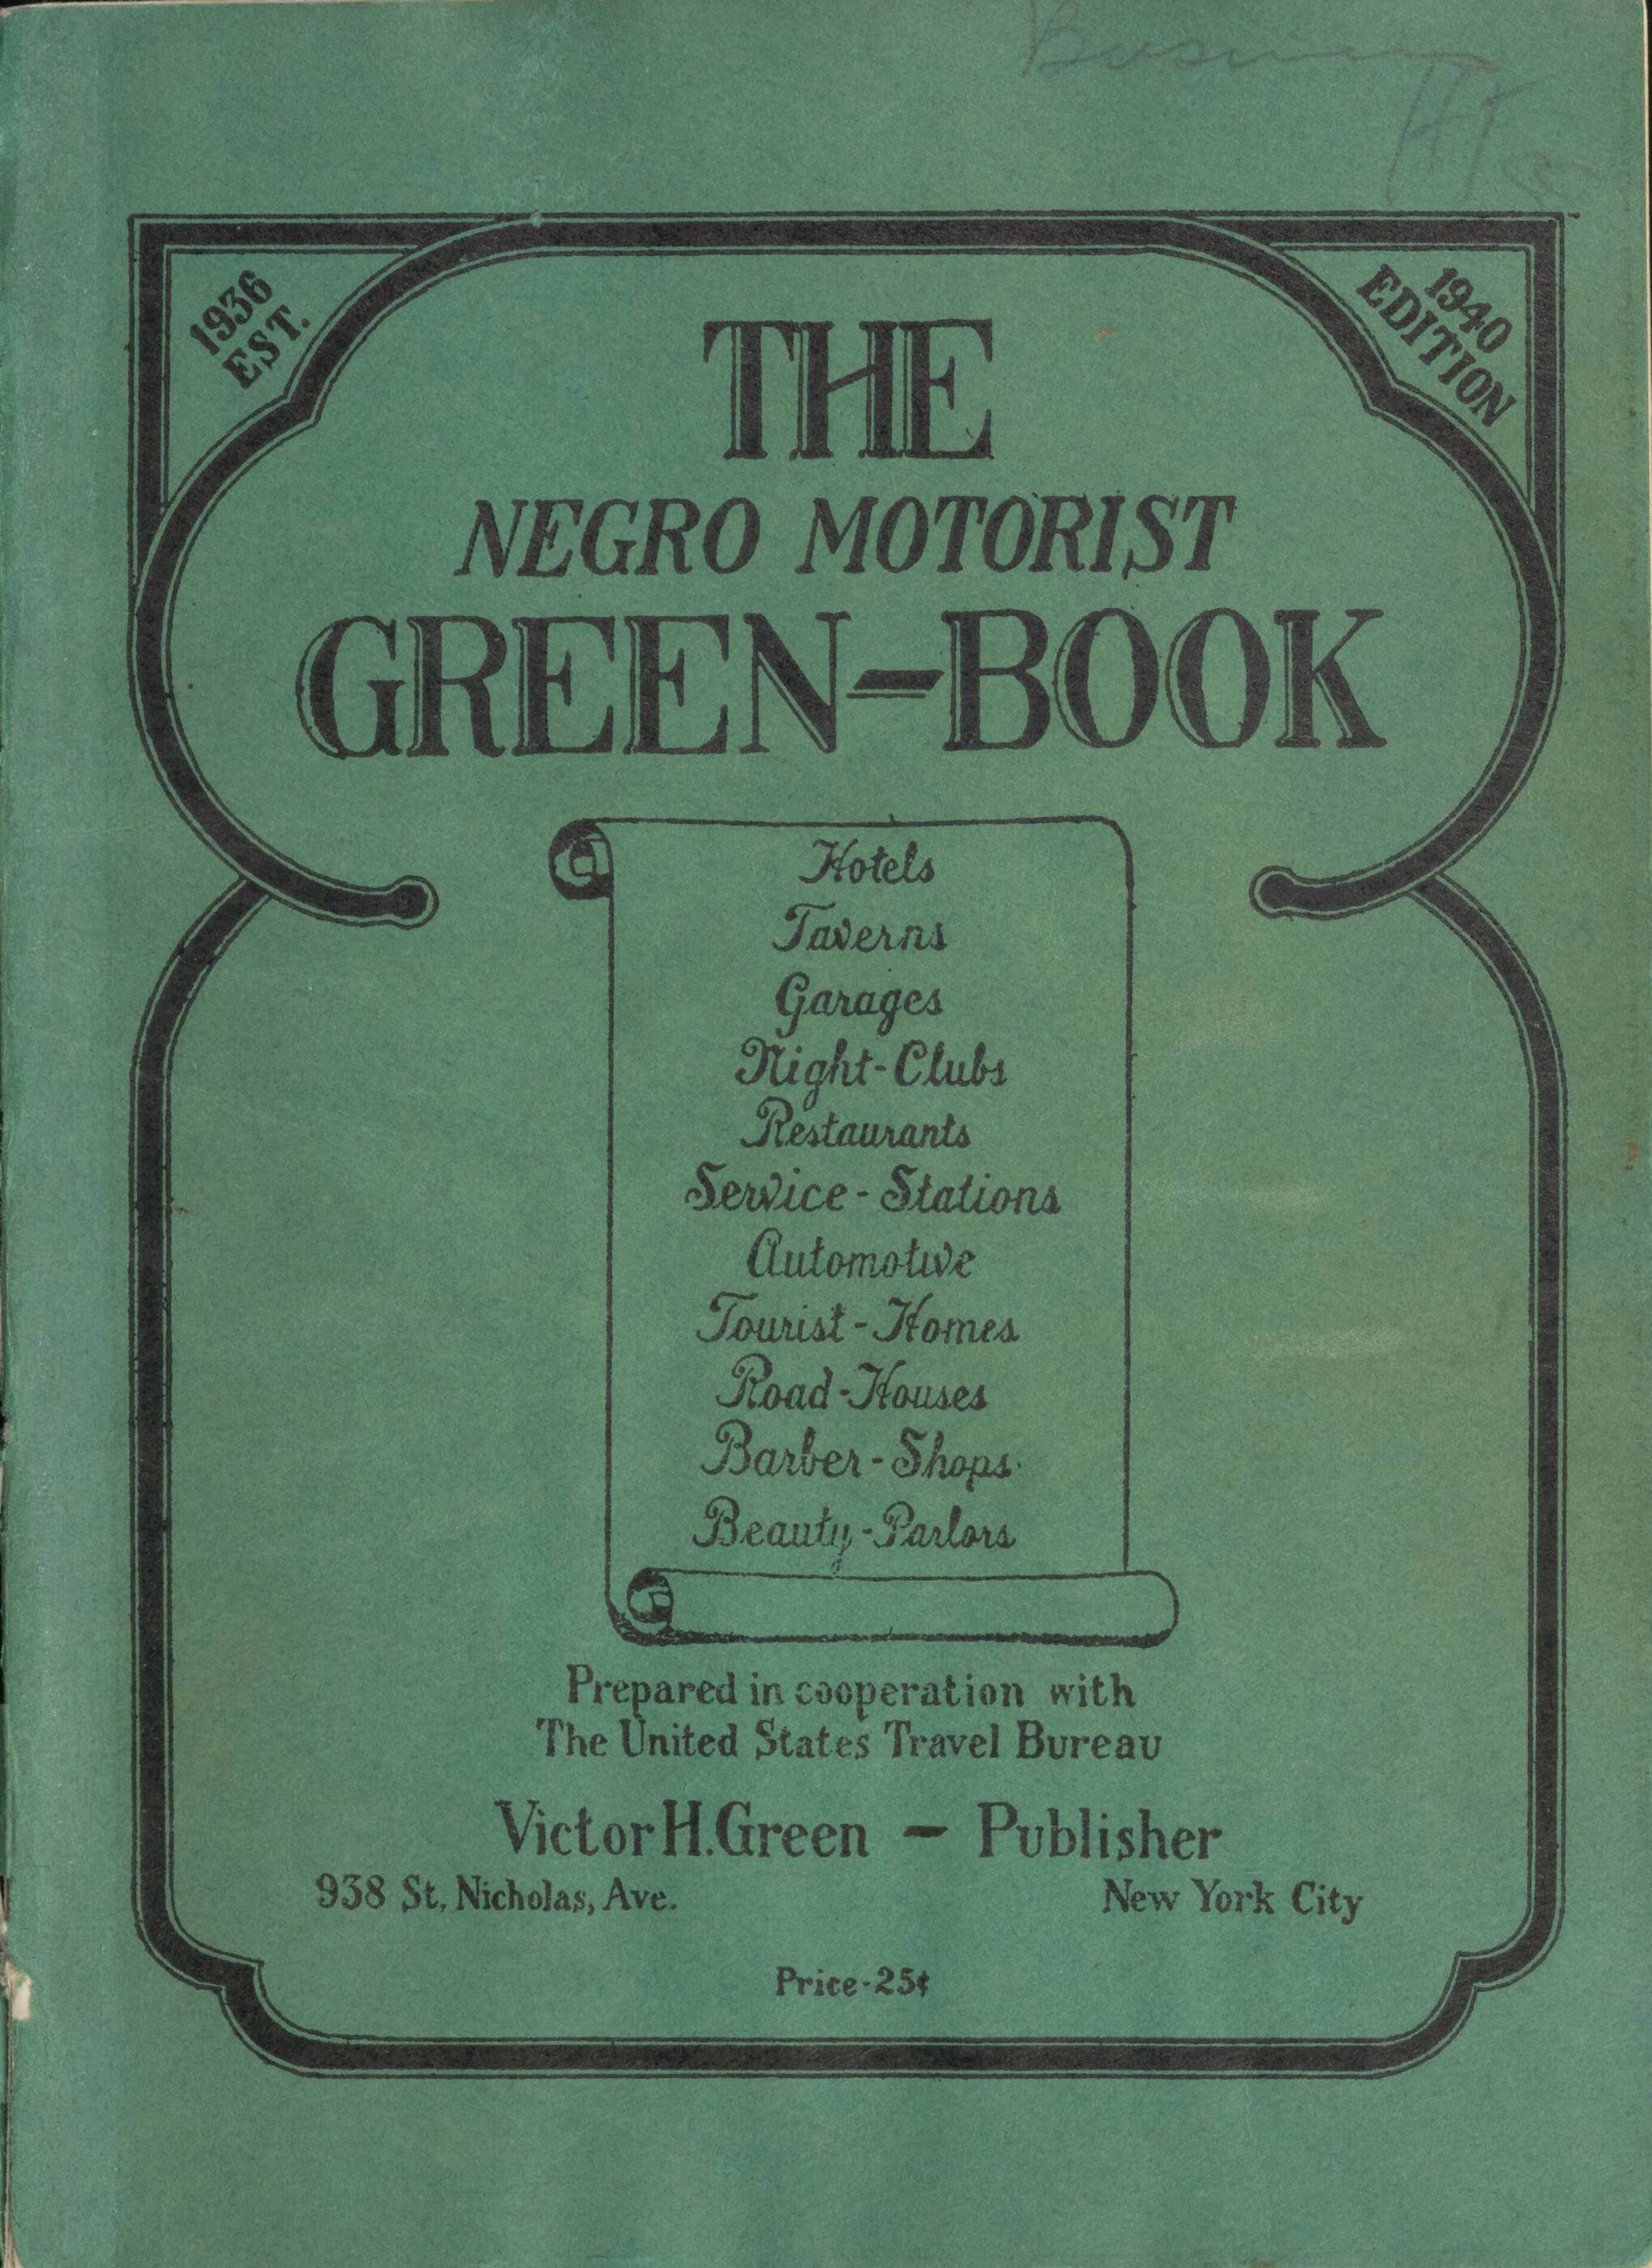 Cover ofThe Negro Motorist Green-Book (1940 edition). Schomburg Center for Research in Black Culture, Manuscripts Archives, and Rare Books Division, New York Public Library.